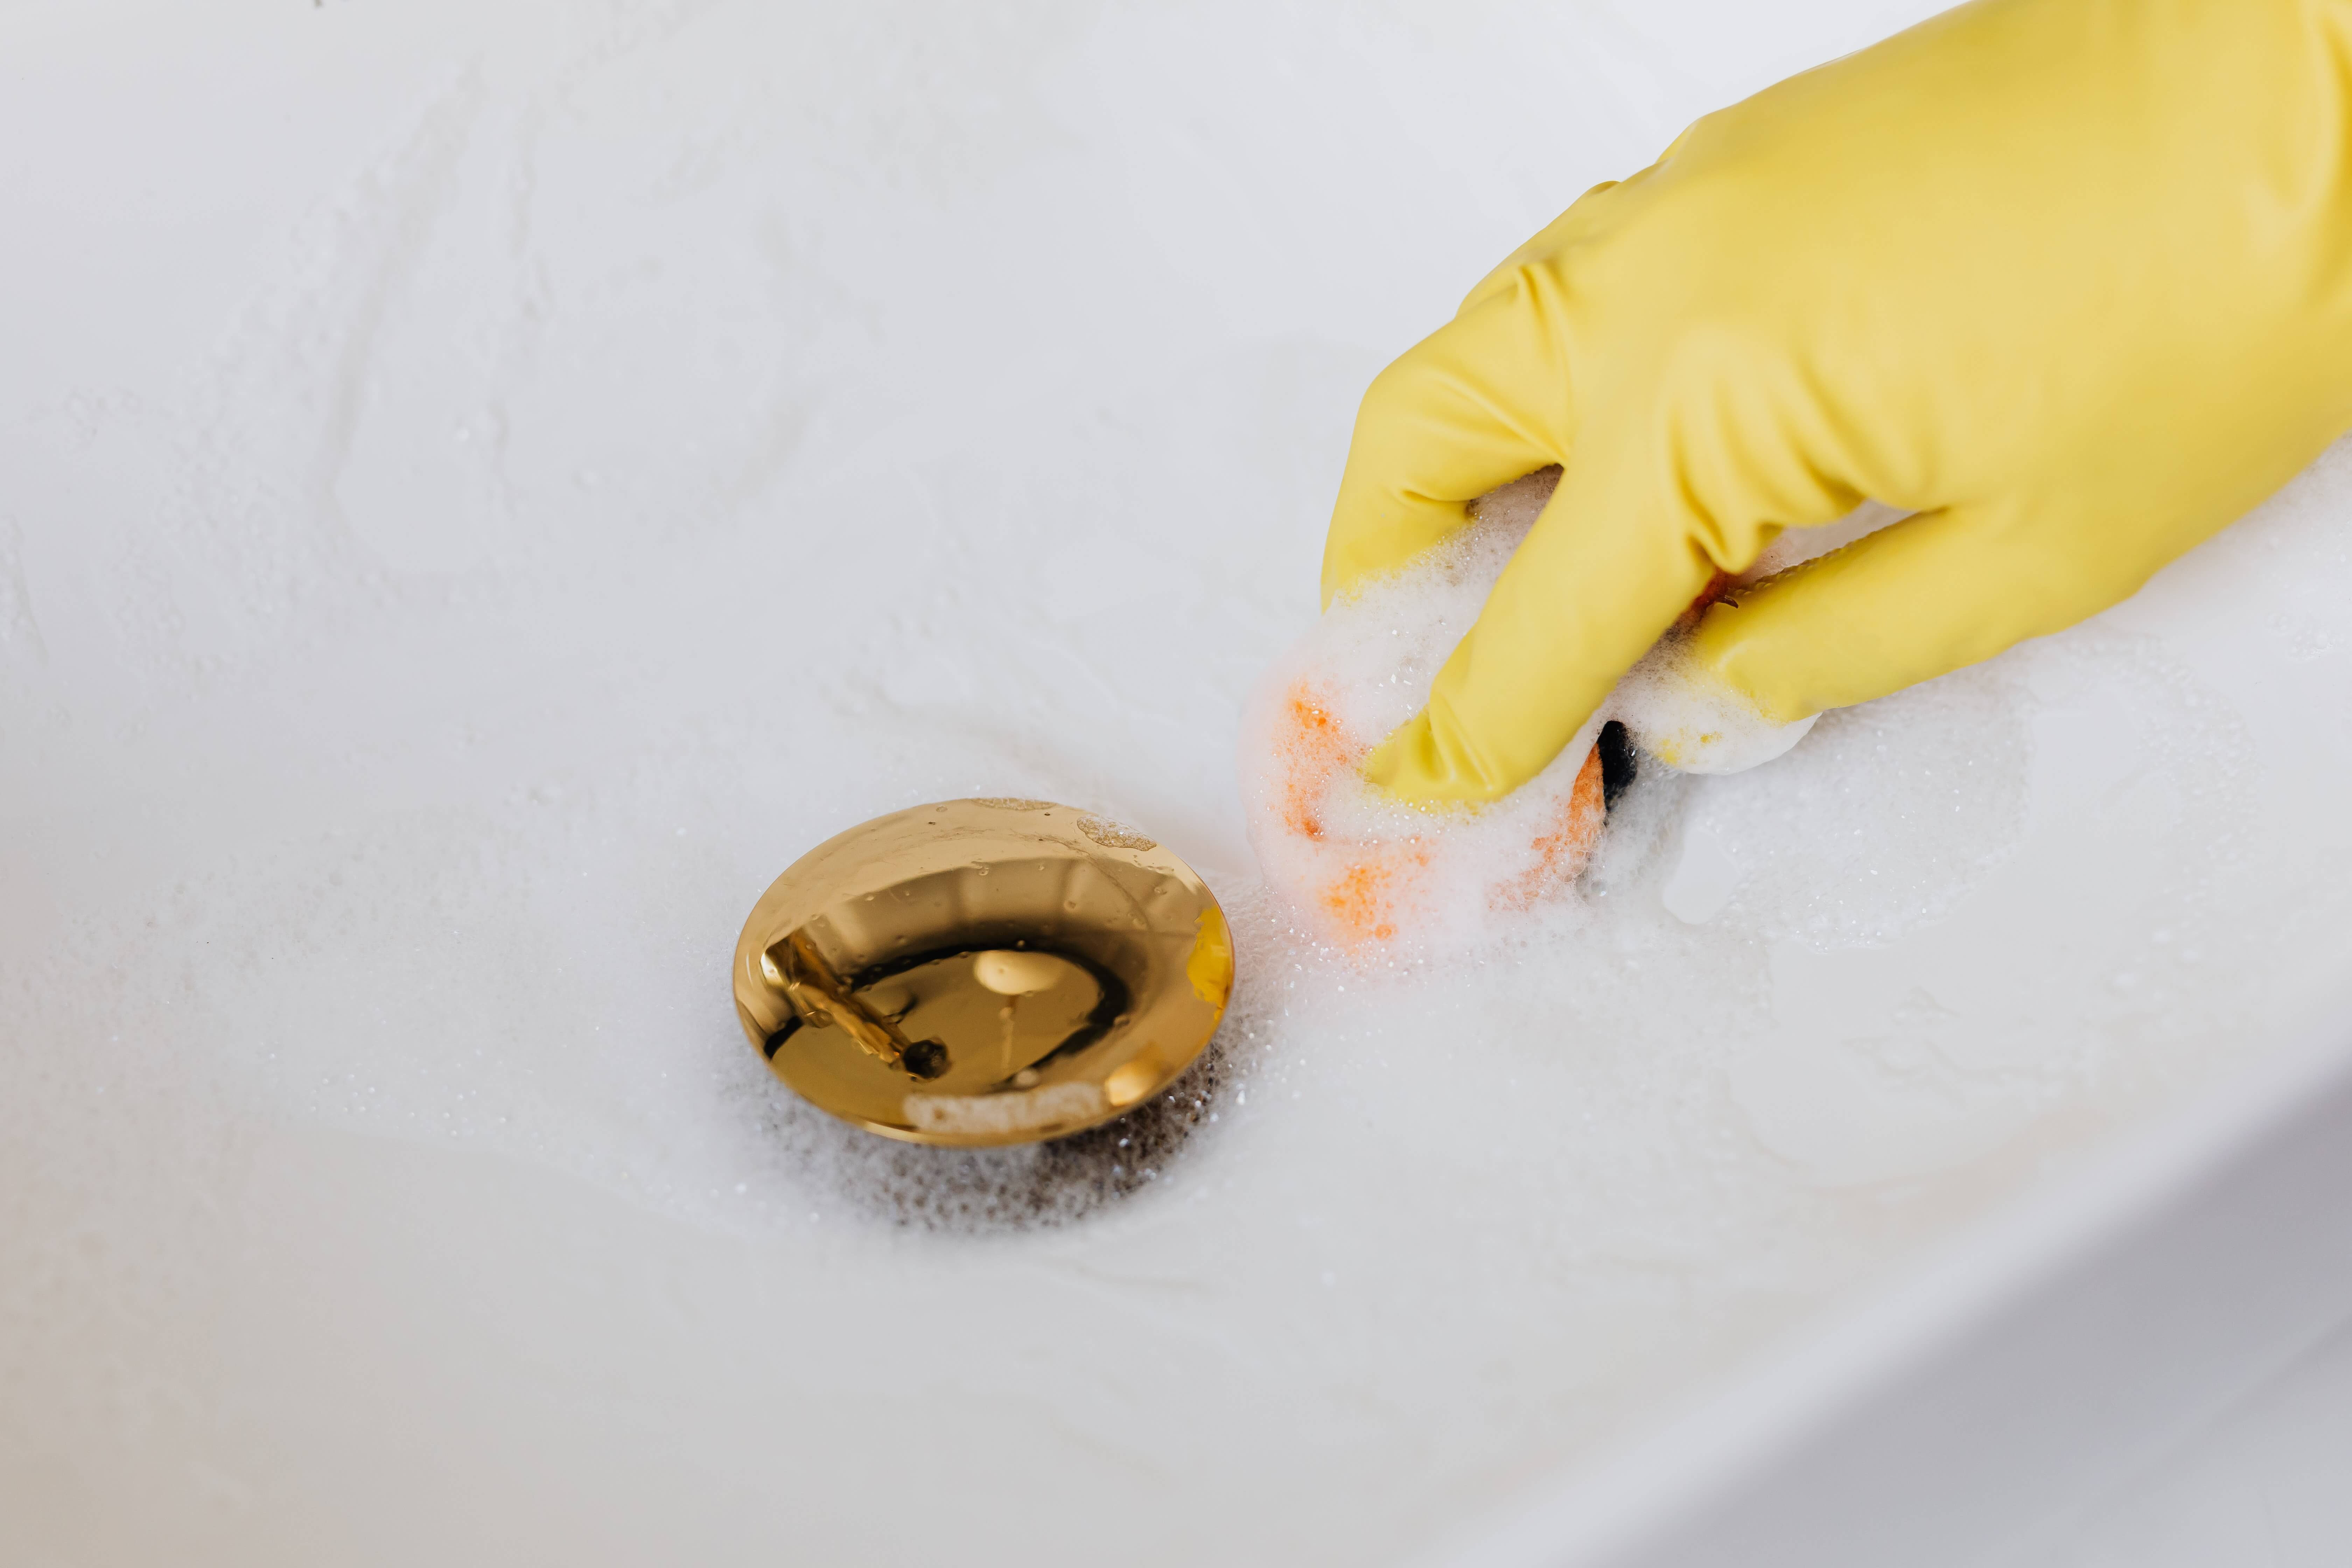 Quick and Effective Home Remedies For Clogged Drains